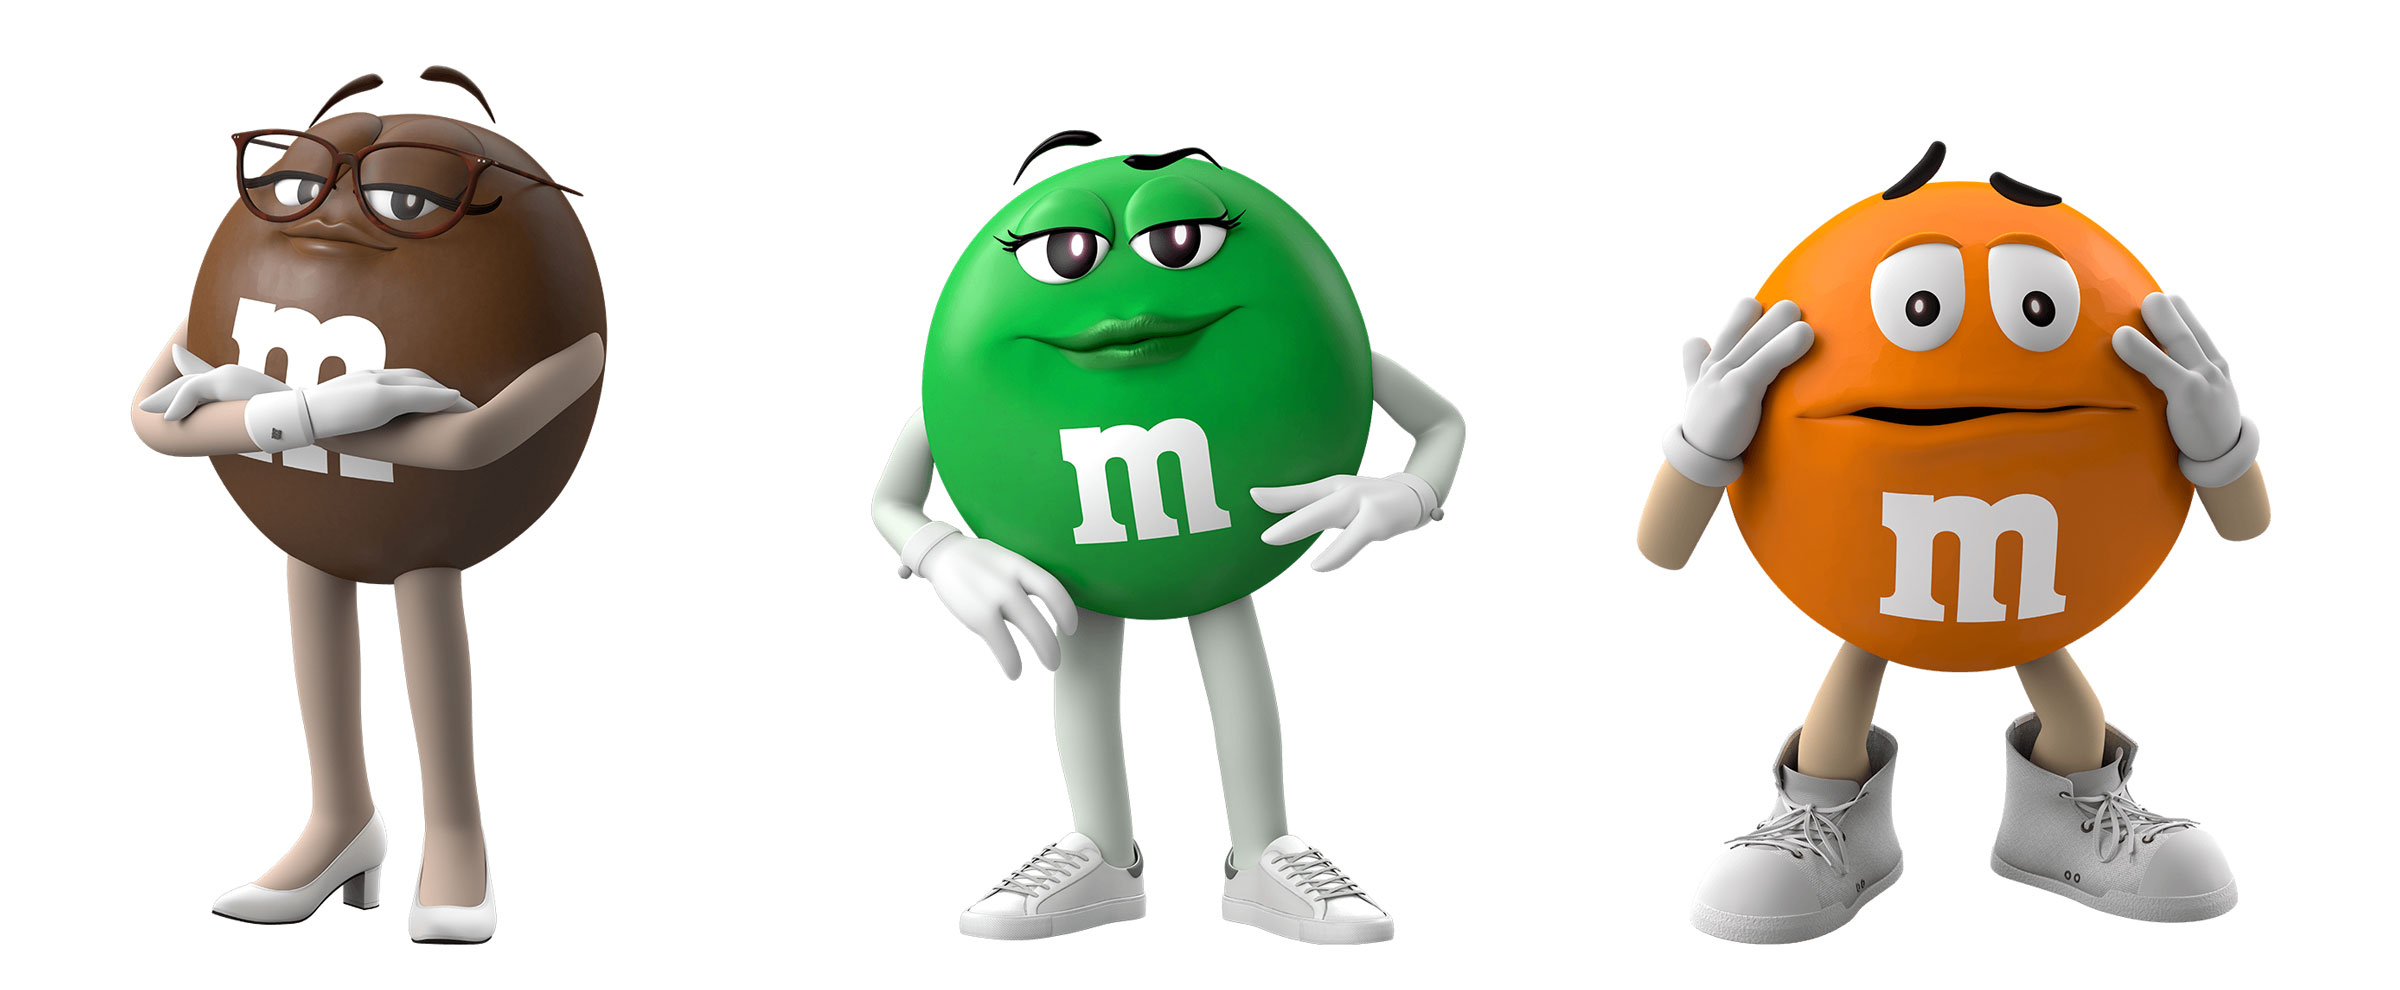 M&amp;M's became the focus of a partisan backlash after the brand made a number of stylistic tweaks to its cast of “spokescandies” last year. (Courtesy M&amp;M’s)